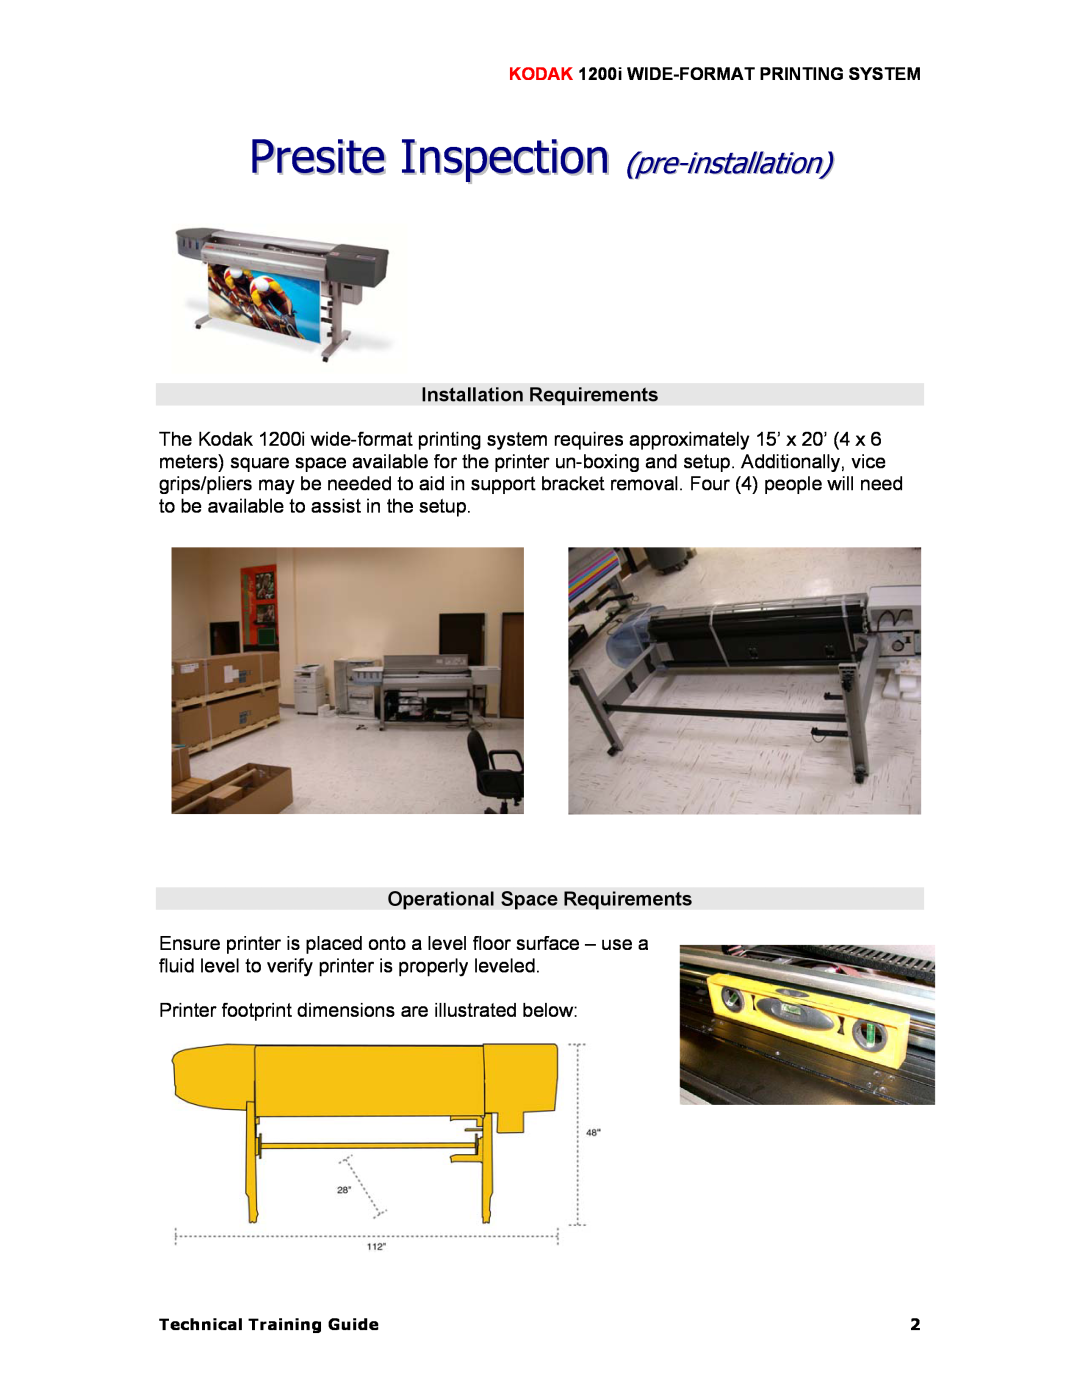 Kodak 1200I manual Presite Inspection pre-installation, Installation Requirements, Operational Space Requirements 